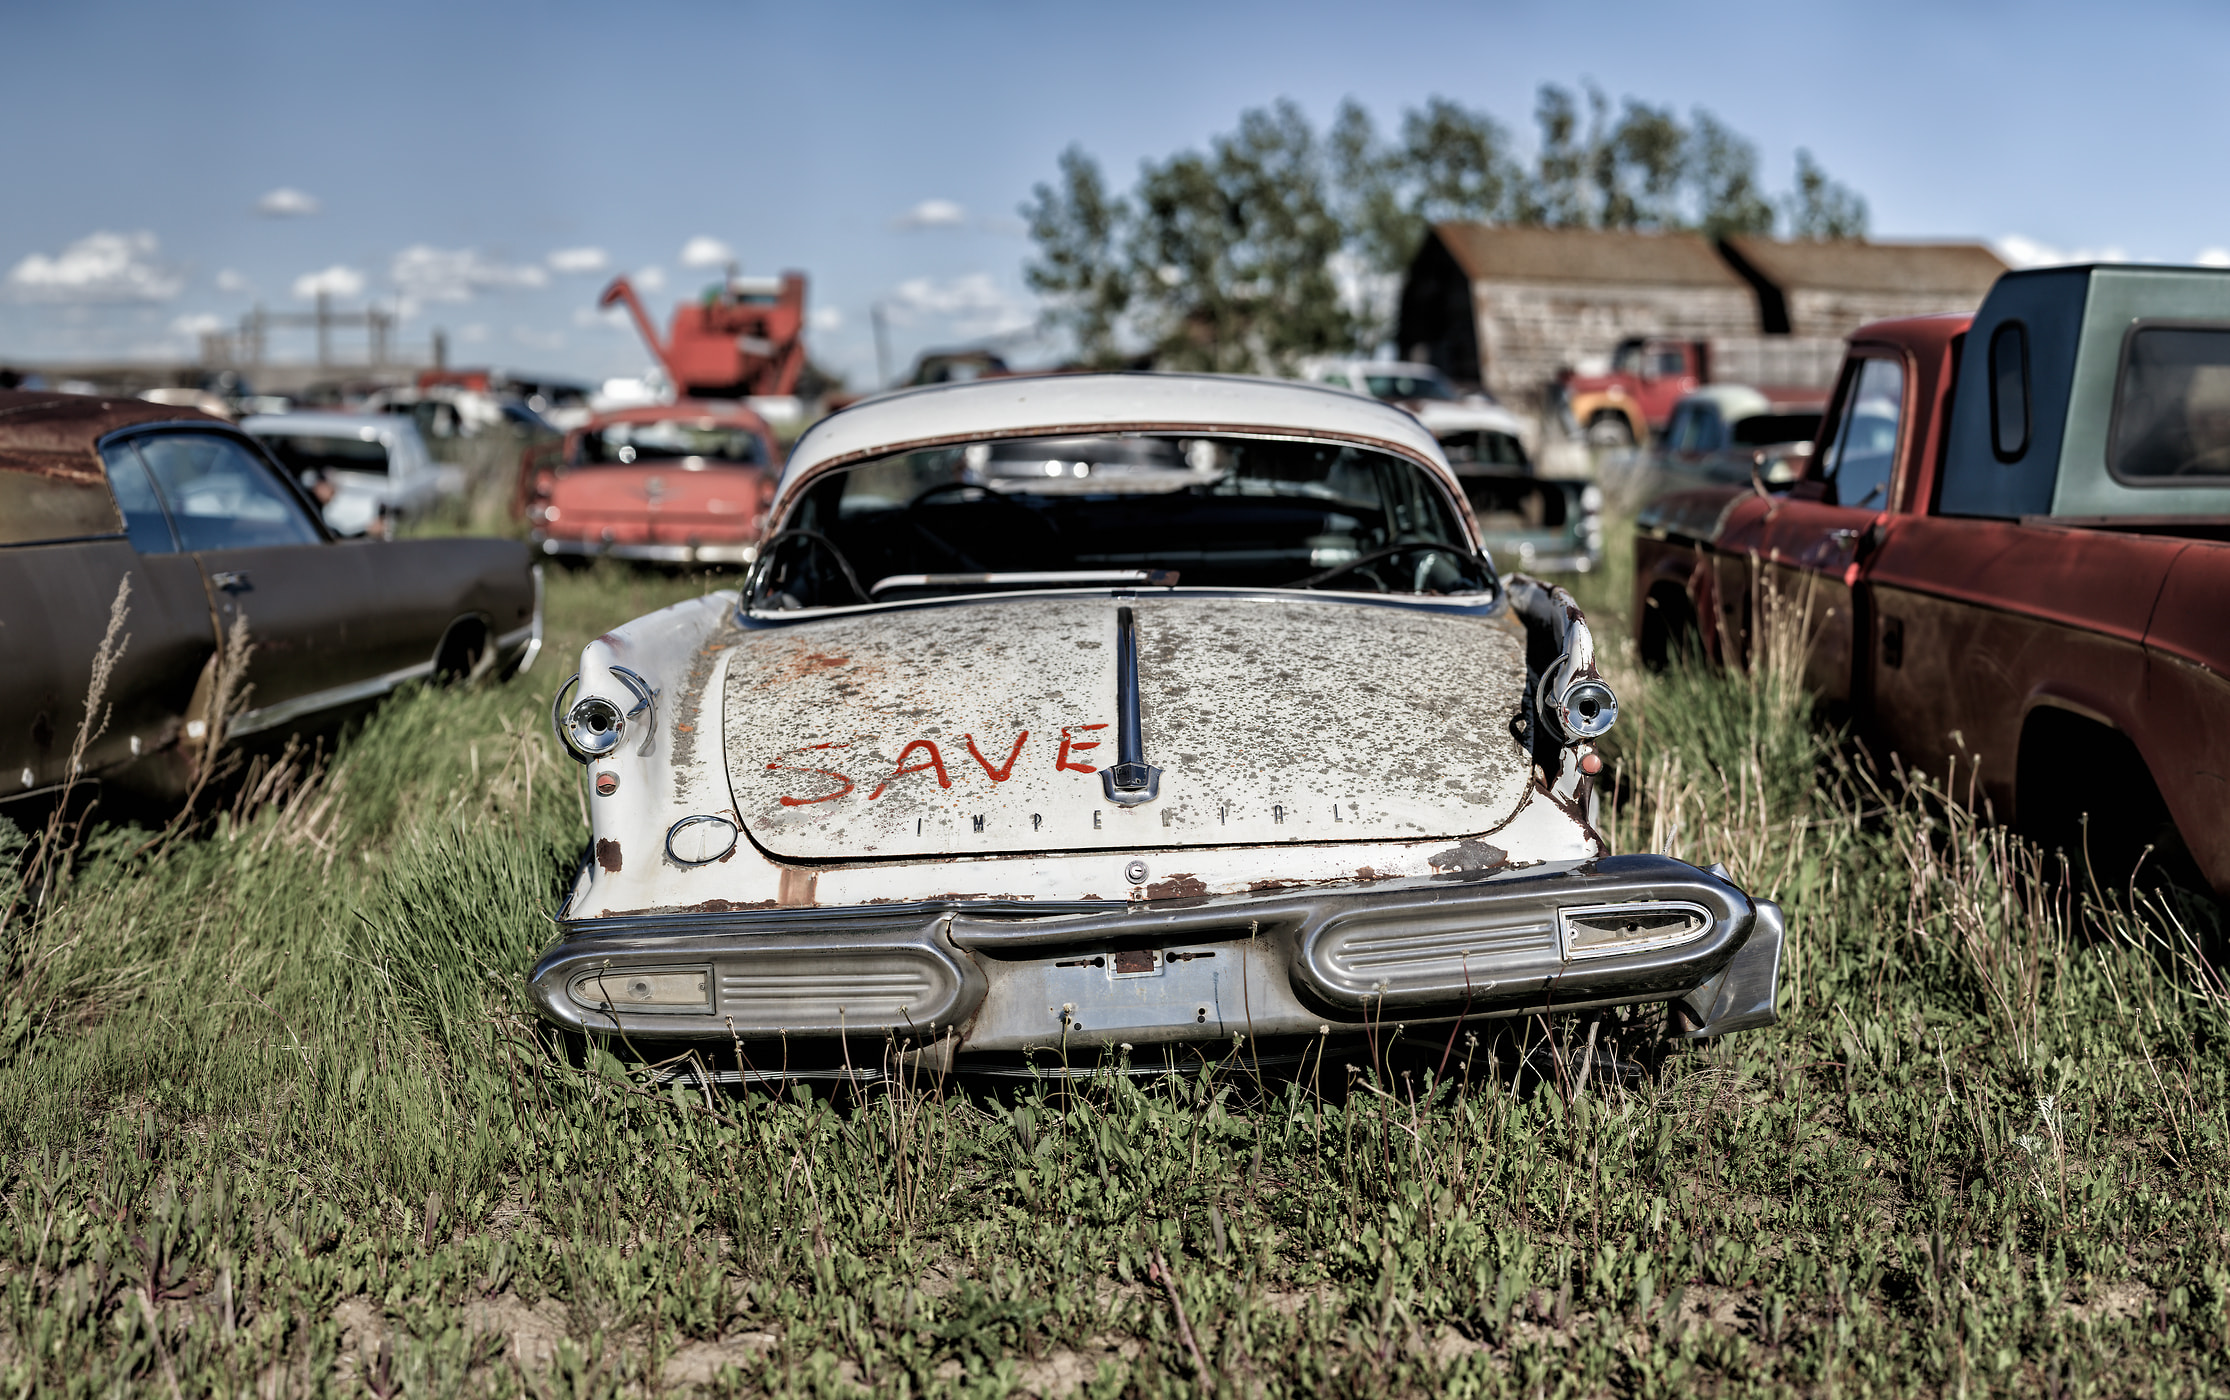 1,636 megapixels! A very high resolution, large-format VAST photo print of an abandoned car in a junkyard; photograph created by Scott Dimond.